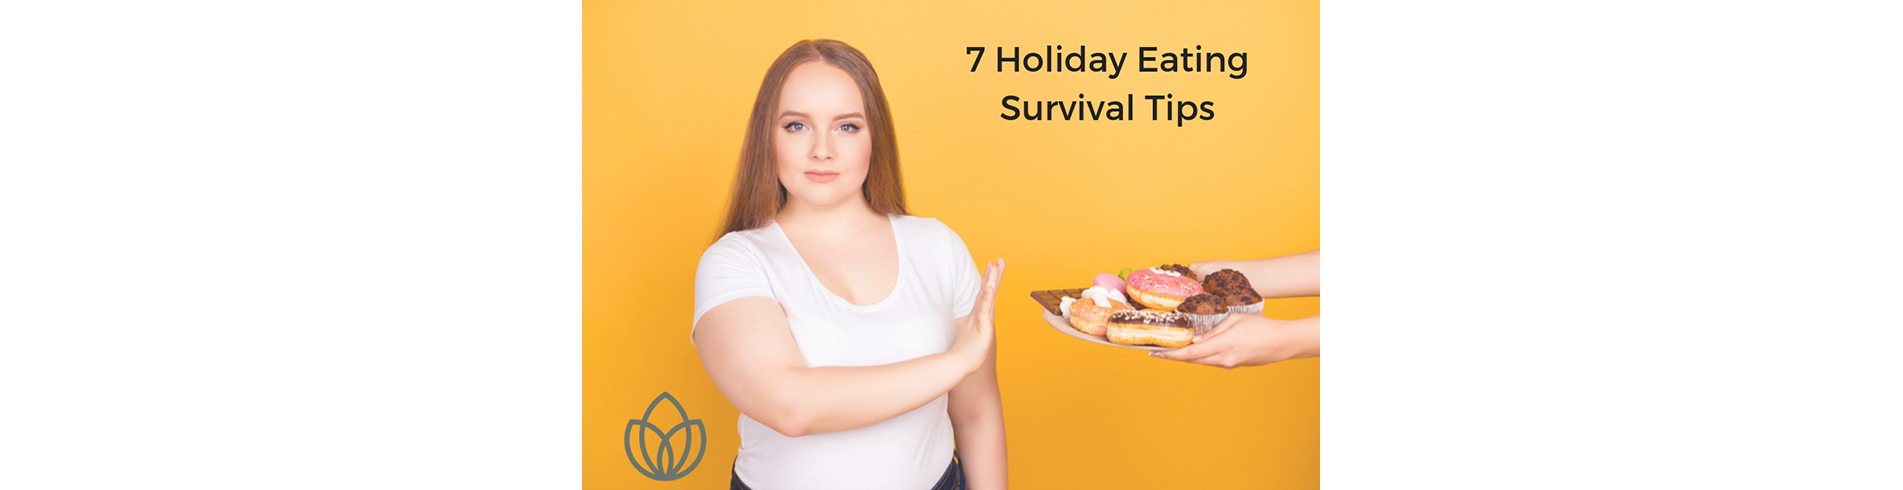 7 Holiday Eating Survival Tips